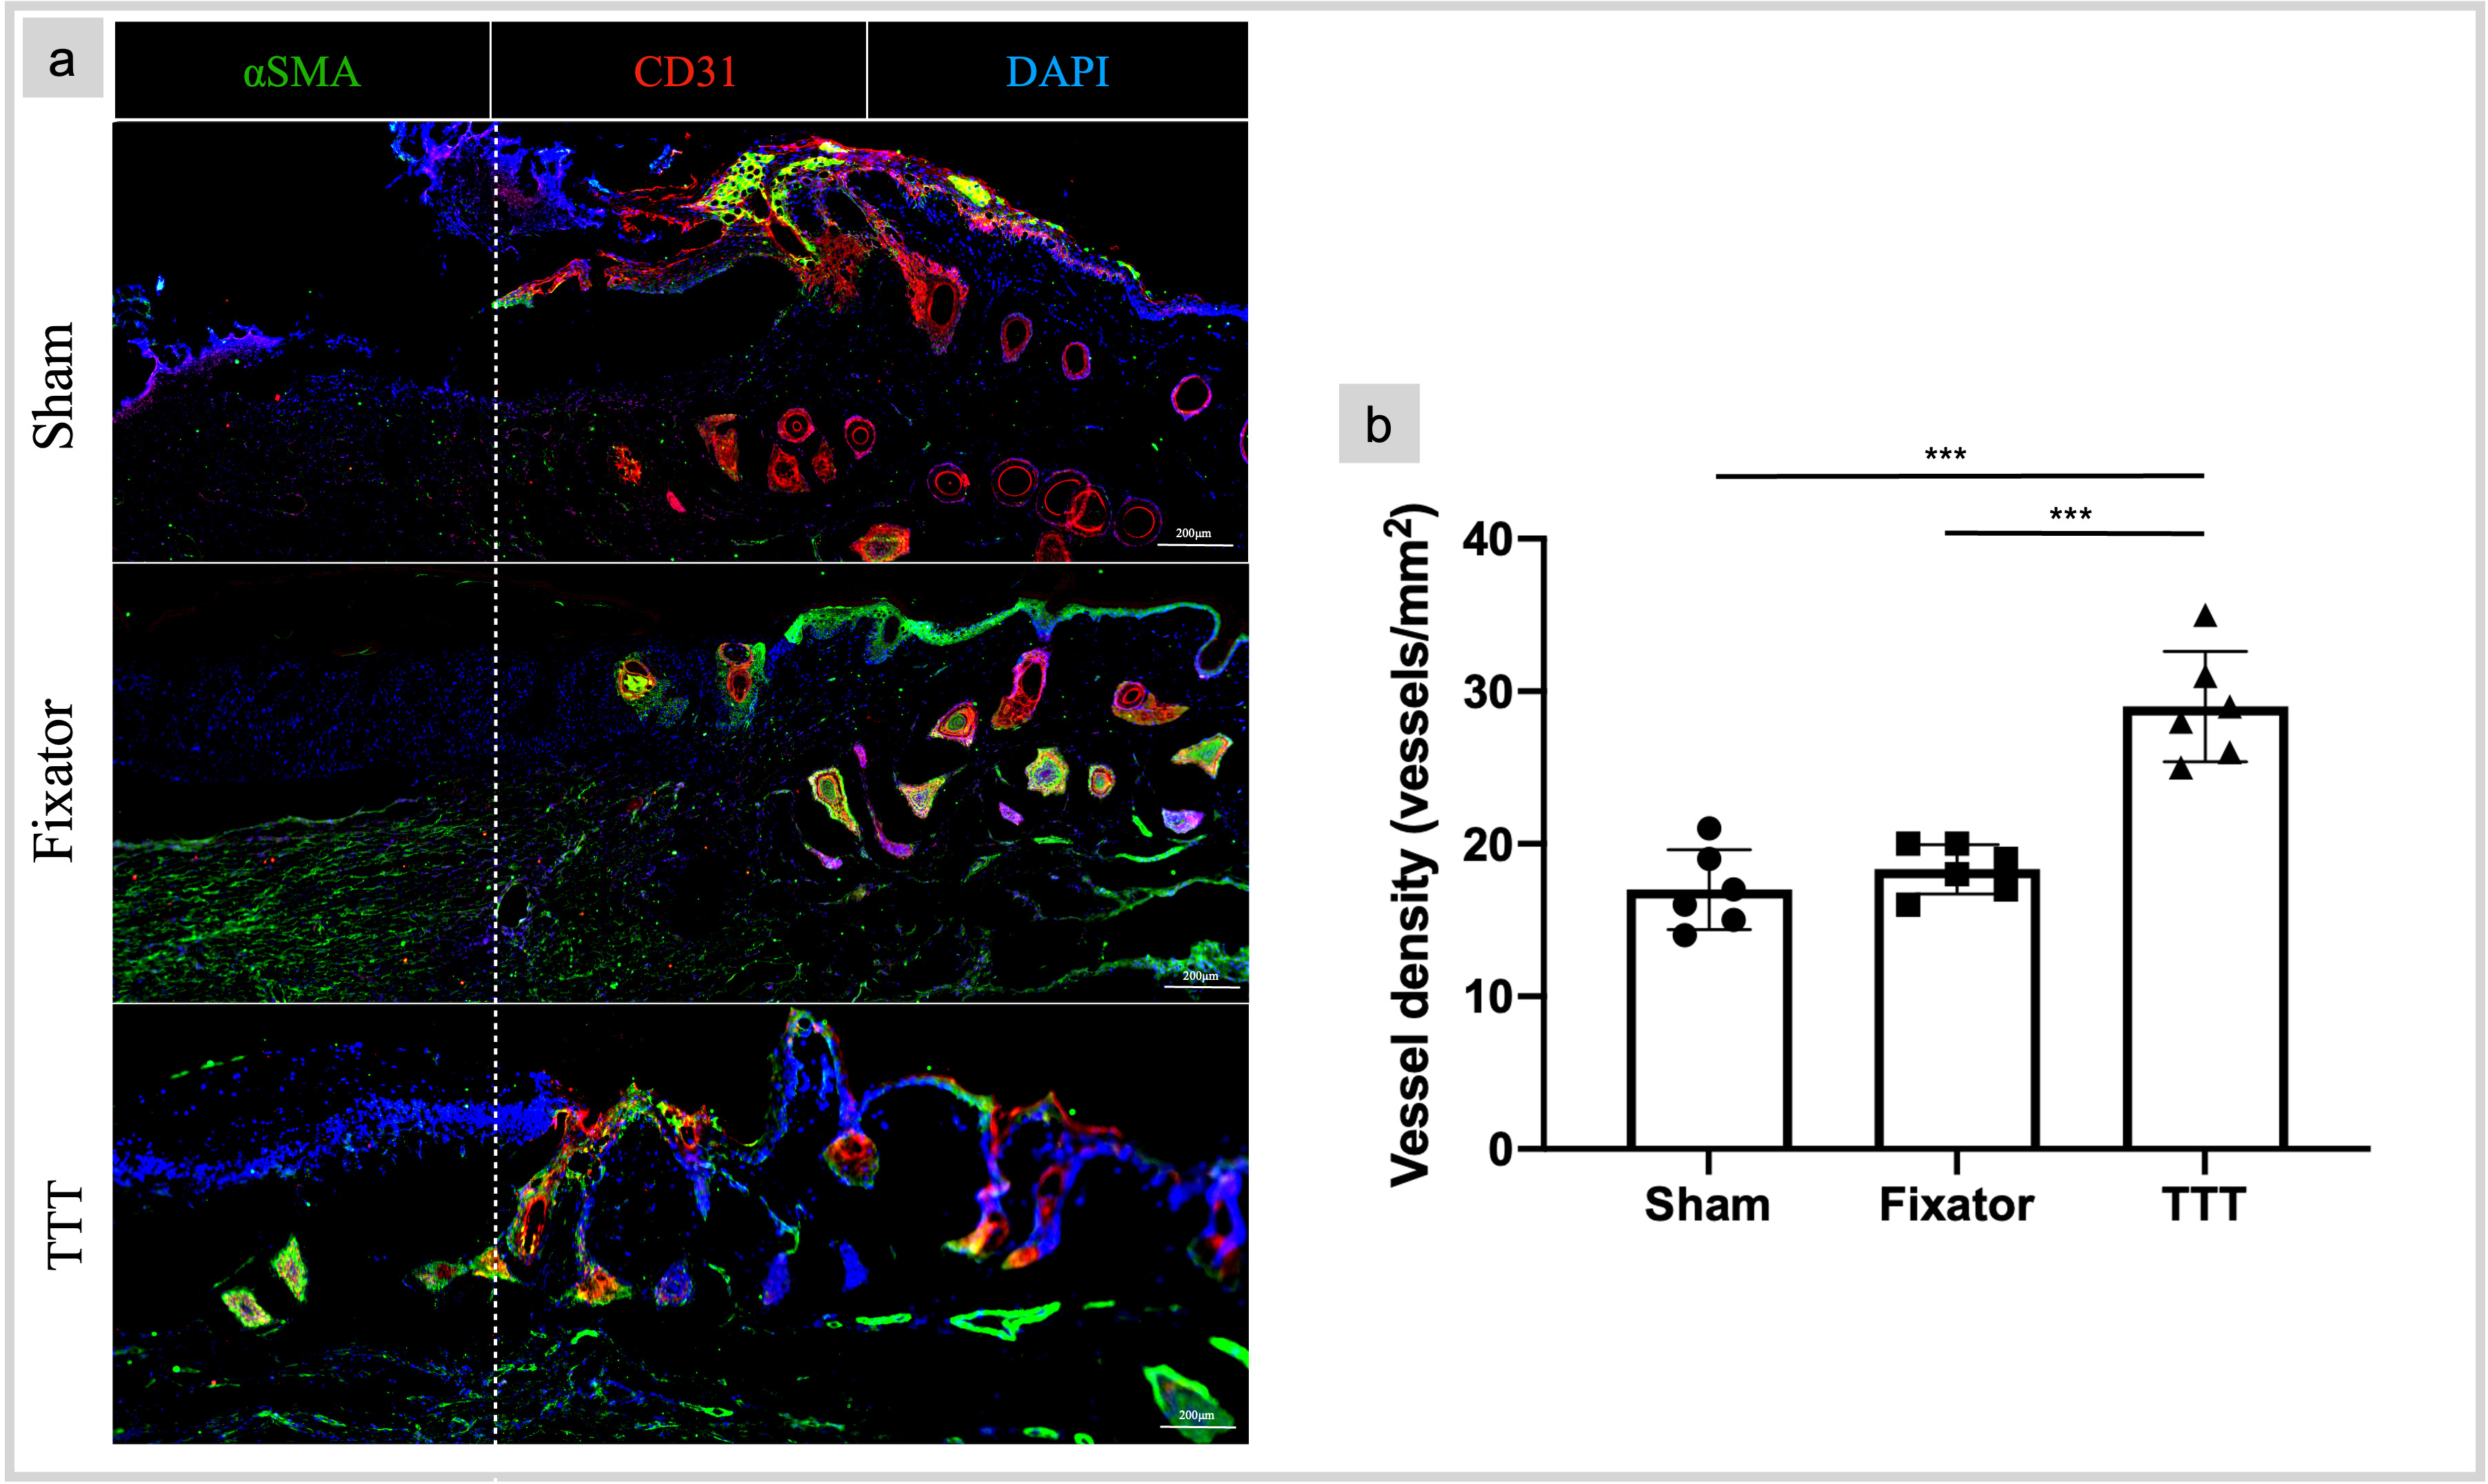 Fig. 5 
            Tibial cortex transverse transport (TTT) technique enhanced small vessels in the newly formed skins. a) Wound sections were double-labelled for CD31 (red) and α-SMA (green). Nuclei were stained with 4',6-Diamidino-2-Phenylindole (DAPI, blue). Large vessels were mainly located near the edge of healthy skin, and smaller vessels were seen inside the newly formed dermis. b) Semi-quantitative measurement of immunostaining showed that the amount of blood vessels in the TTT group was significantly higher than that of the other groups (TTT vs Fixator, p < 0.001, TTT vs Sham, p < 0.001; Tukey’s multiple comparison test). Graphics were generated by Leica Application Suite. Data were measured as means (standard deviations), ***p < 0.001, n = 6.
          